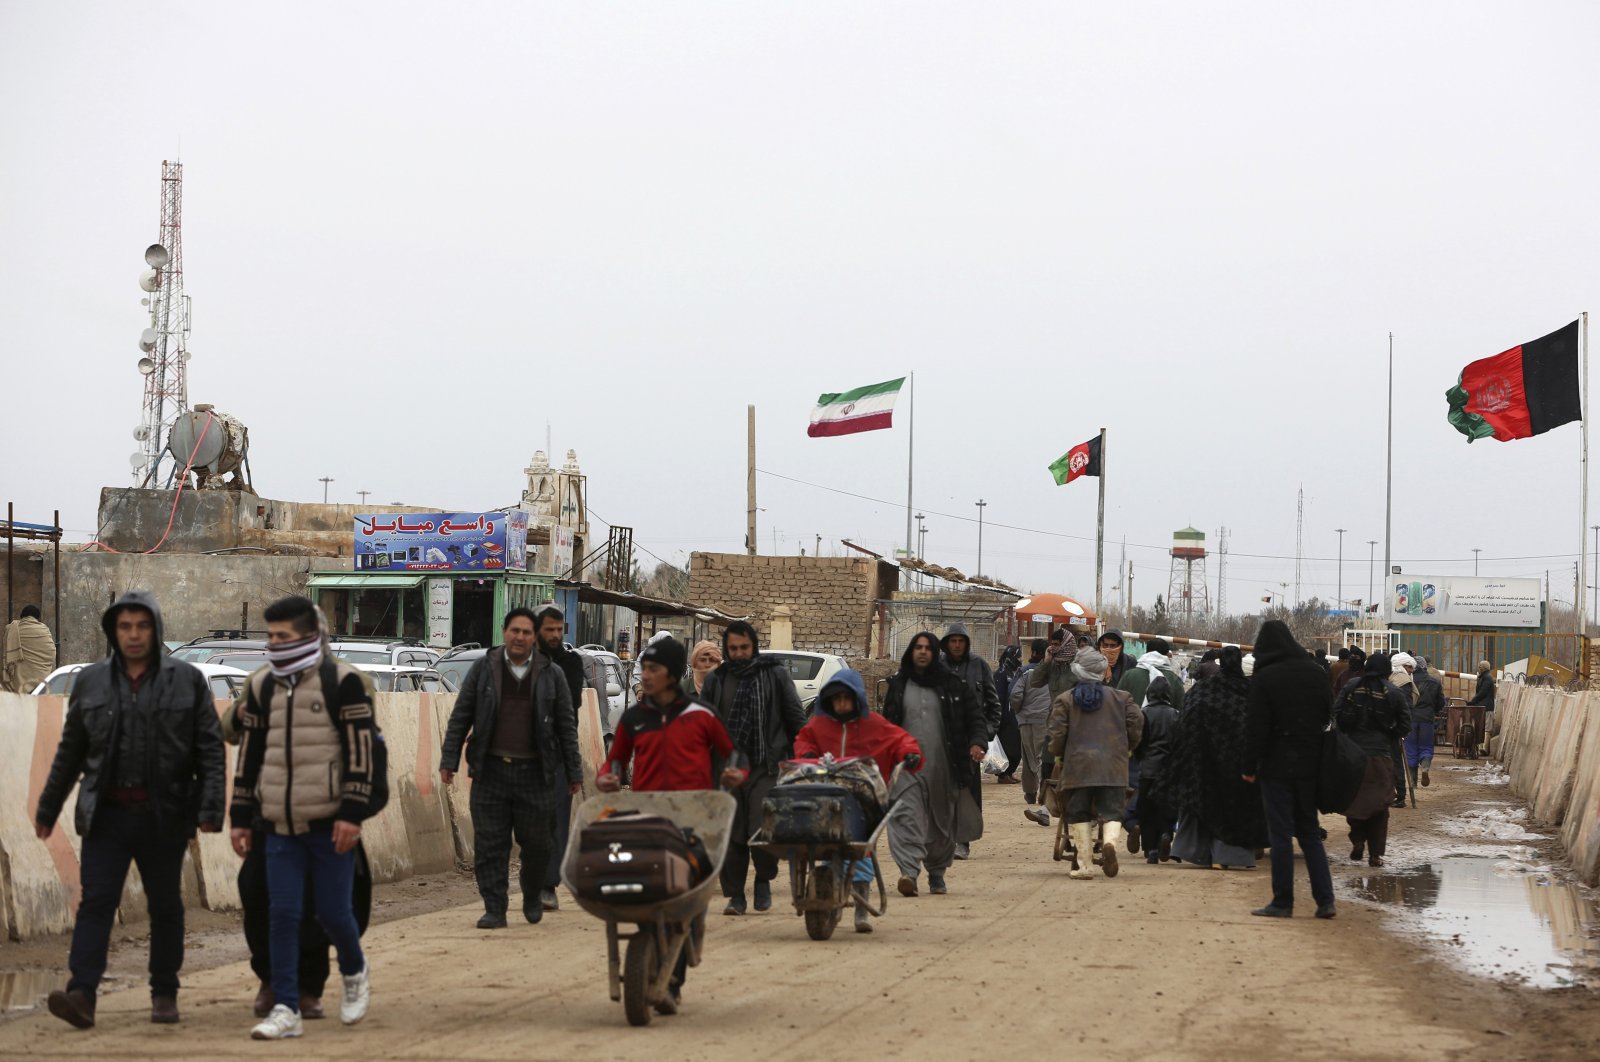 Afghans return to Afghanistan at the Islam Qala border with Iran, in the western Herat Province, Afghanistan, Feb. 20, 2019. (AP Photo)